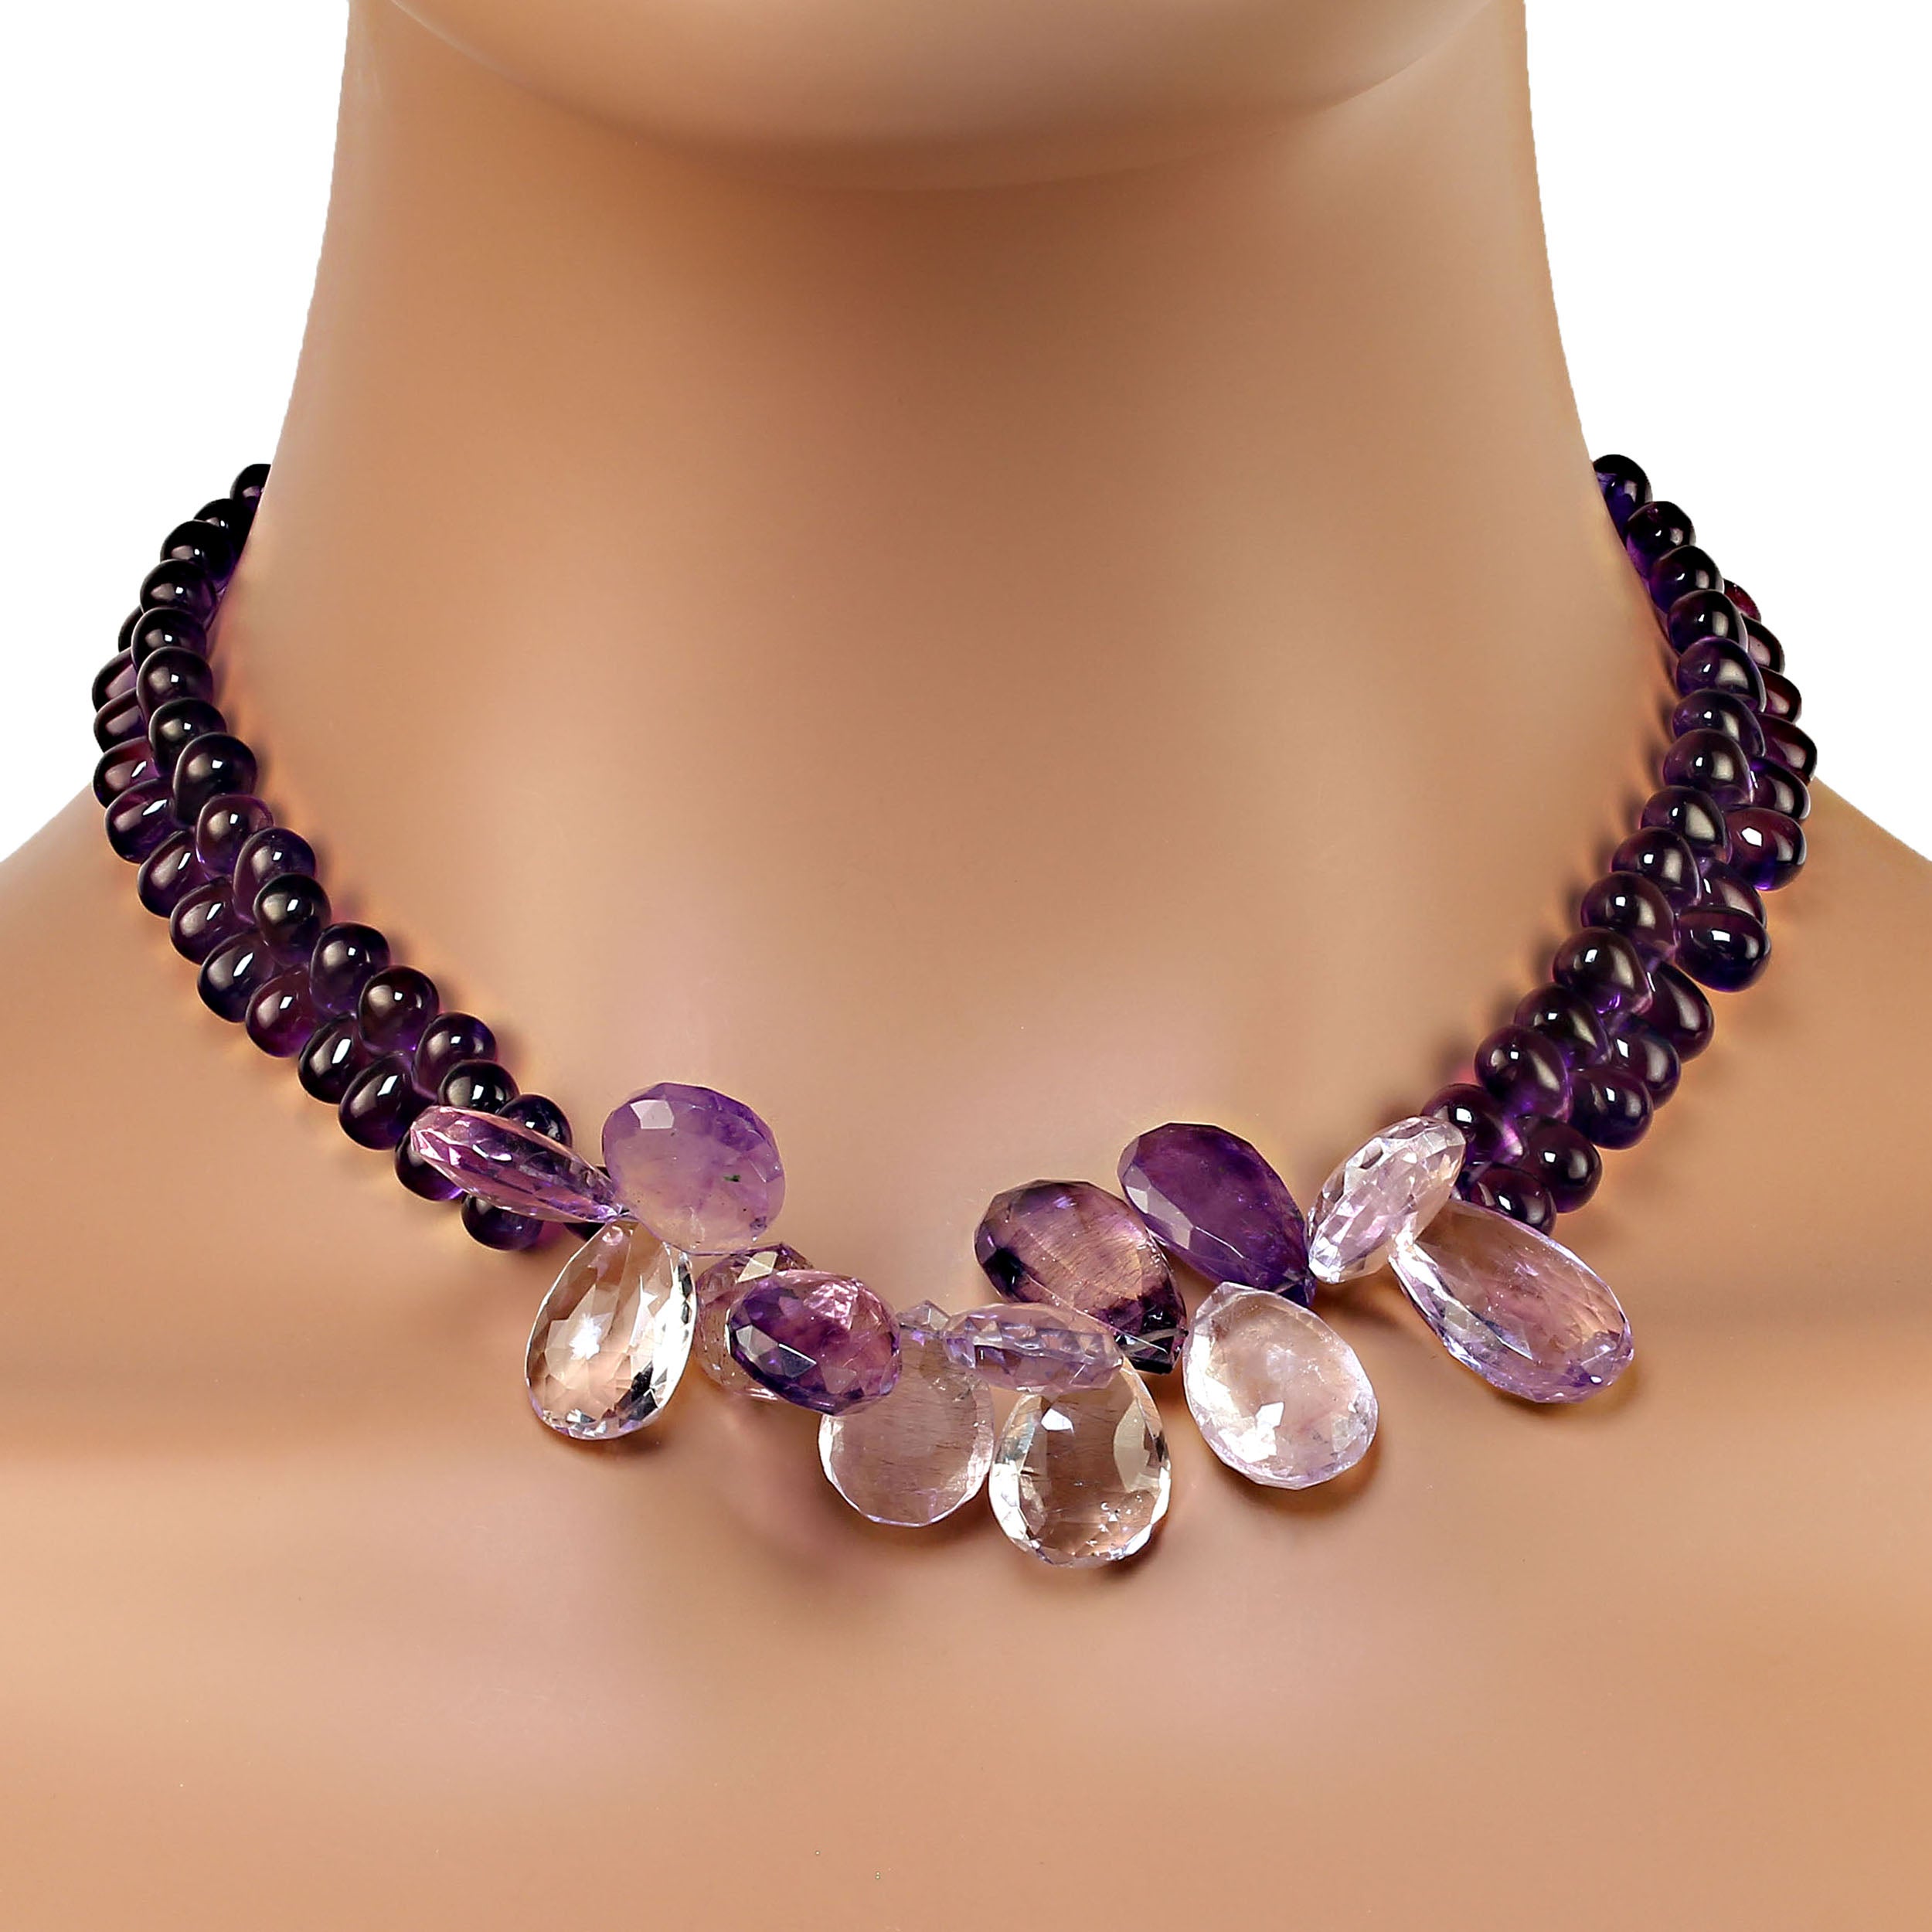 AJD Unique and Exquisite Amethyst 17 Inch necklace  Great February Gift!